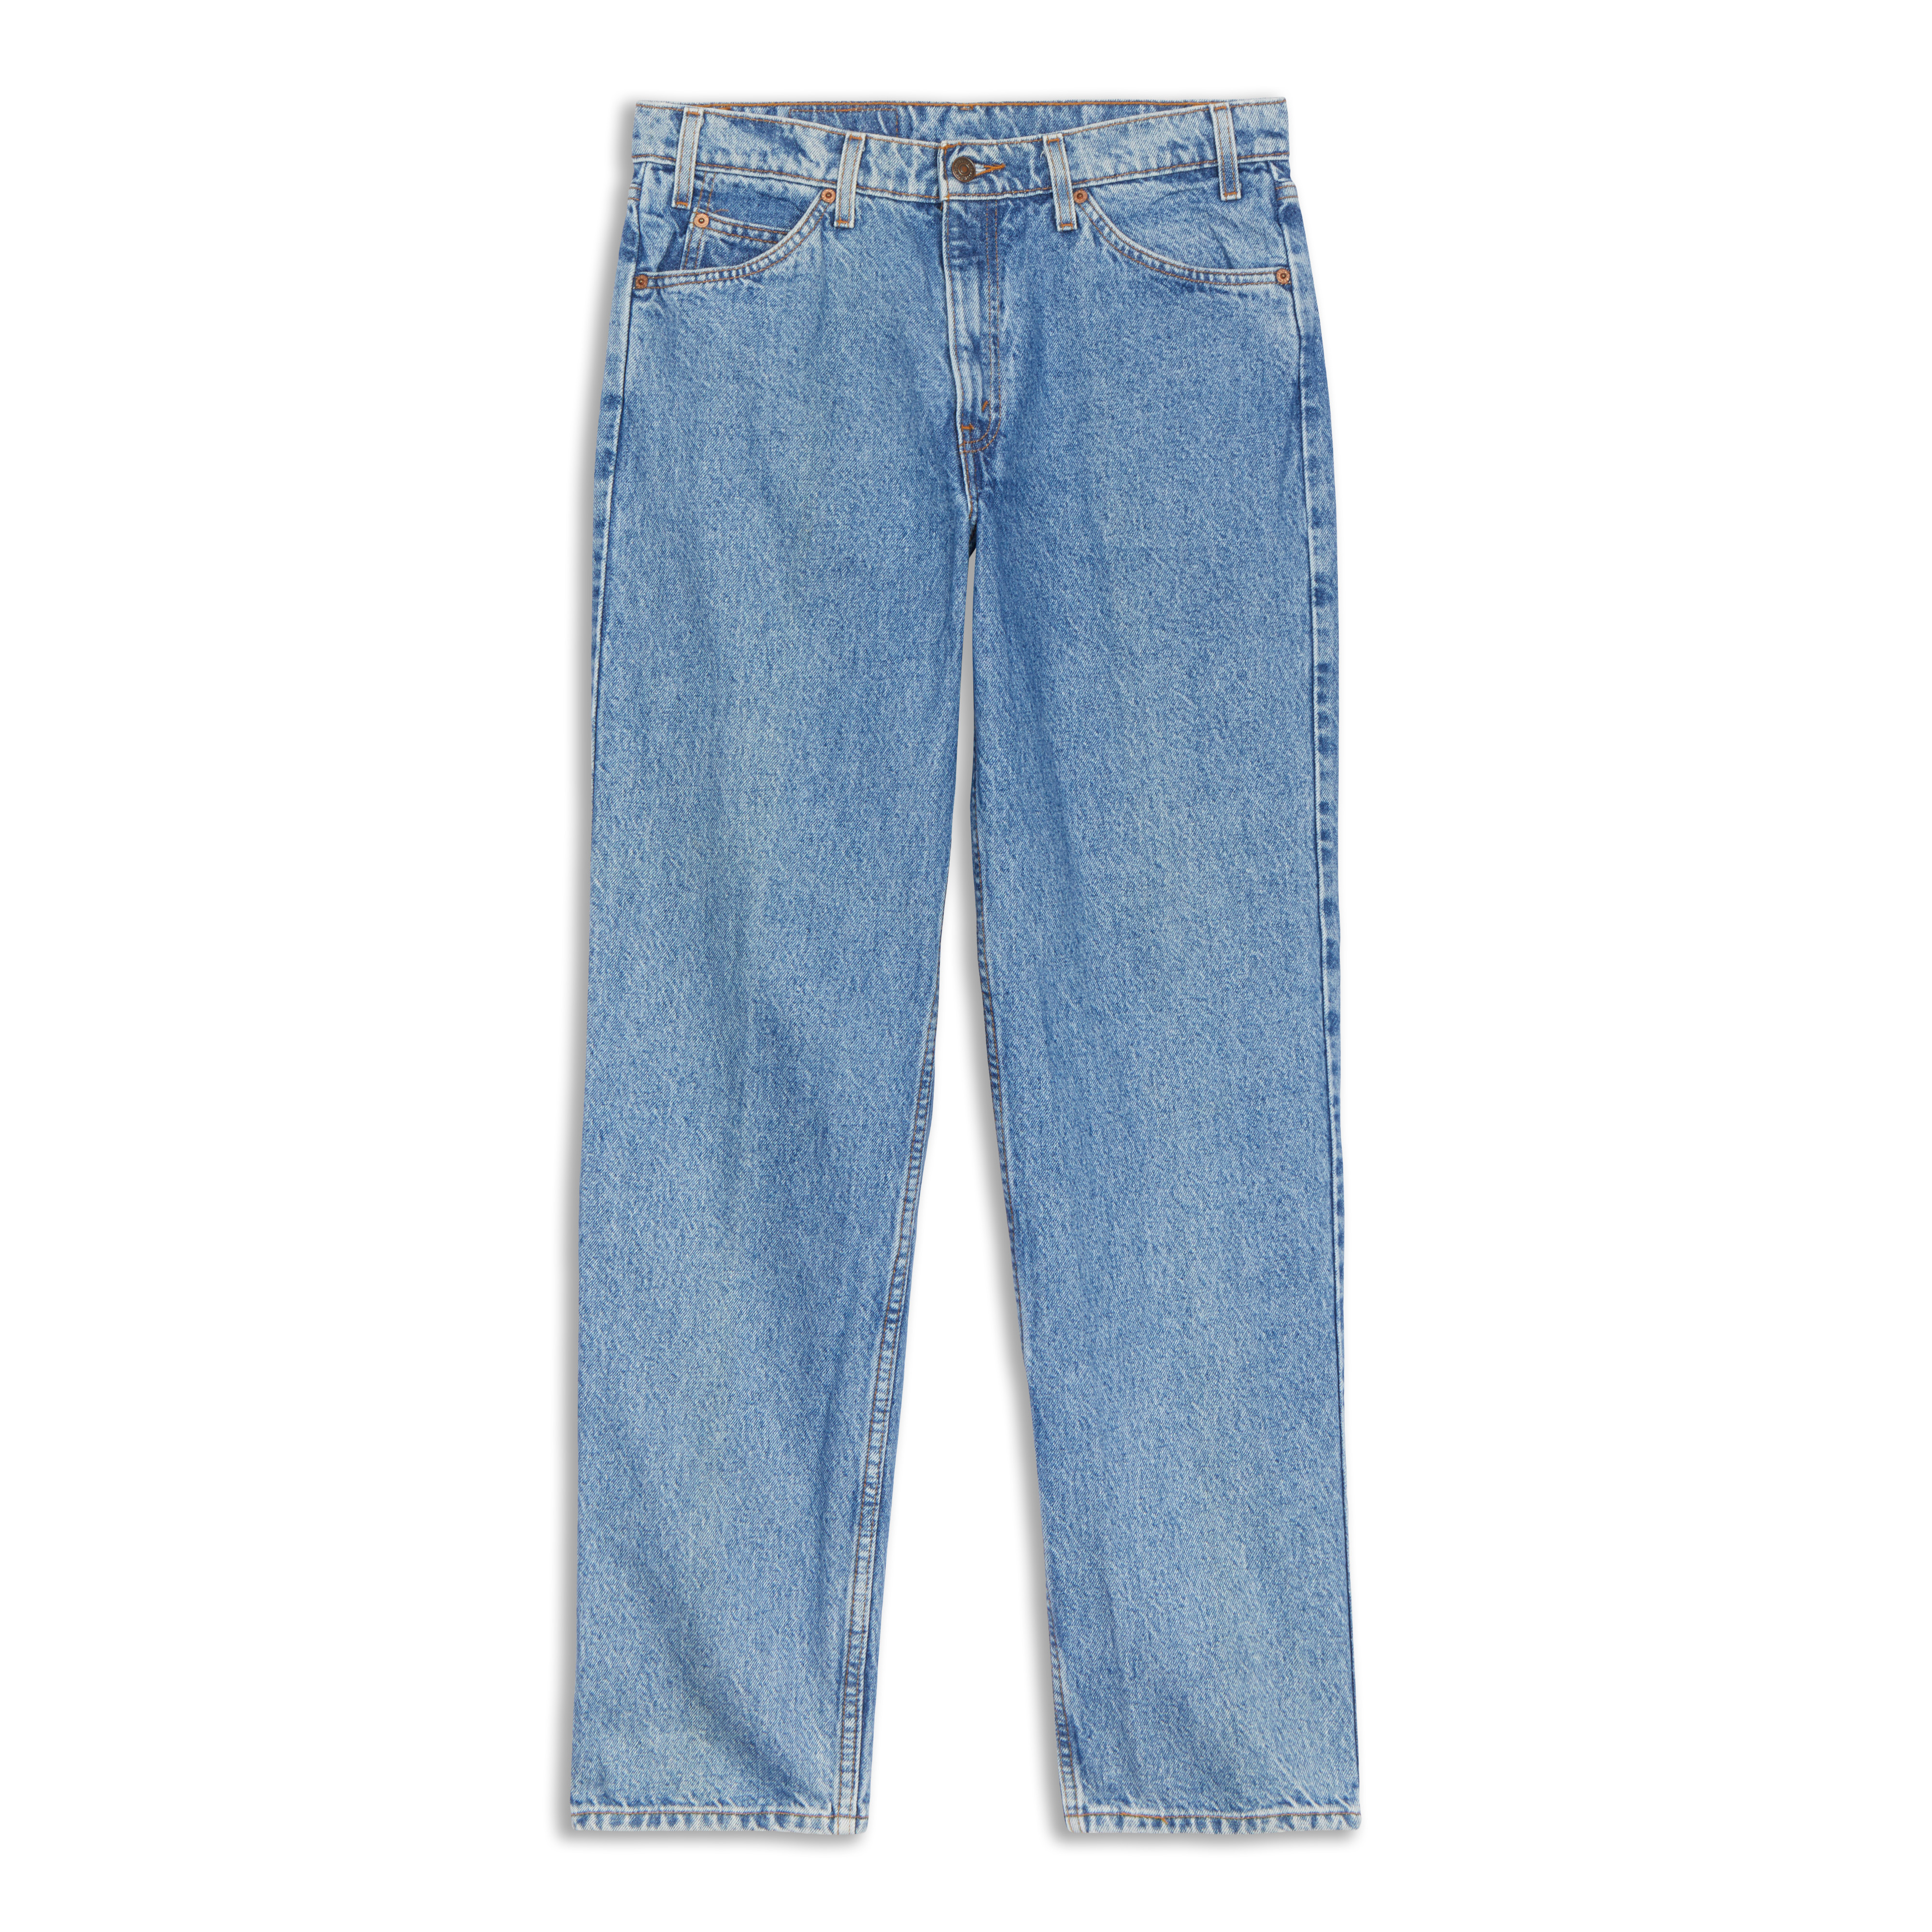 Levis Vintage Orange Tab 550™ Relaxed Jeans Grey